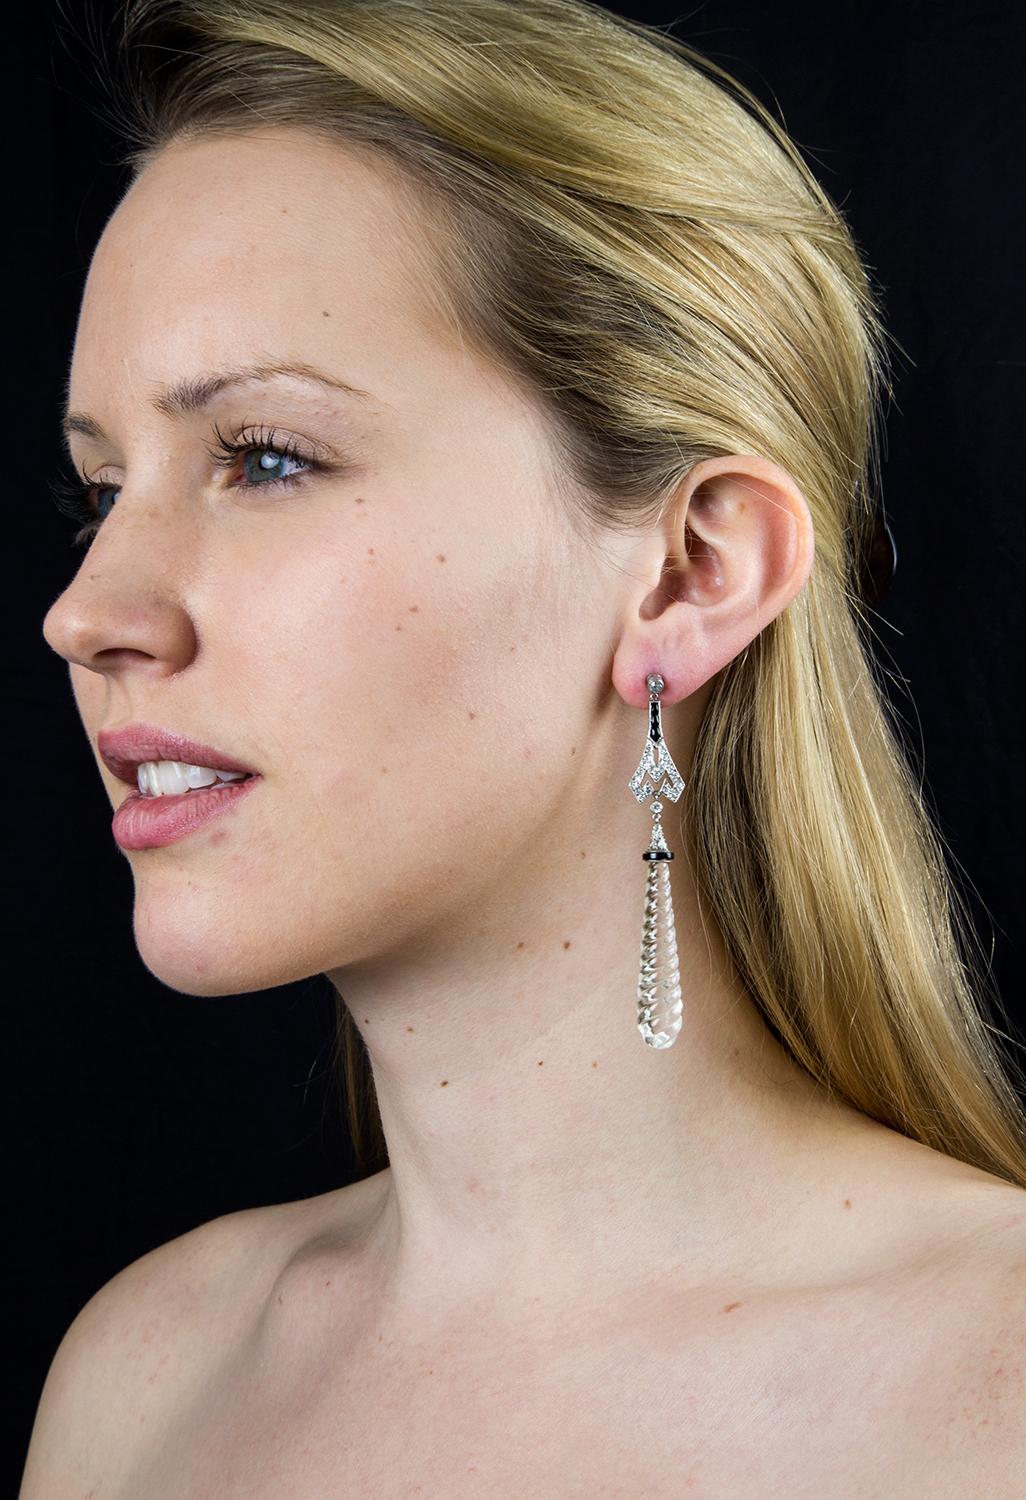 Stylish and Classic Dangle Earrings; each earring features a large tear-drop shaped rock crystal, suspended from the Diamond and Onyx topper; hand crafted with  platinum mounts; approx. 1 Carat total diamond weight. These bold, yet understated